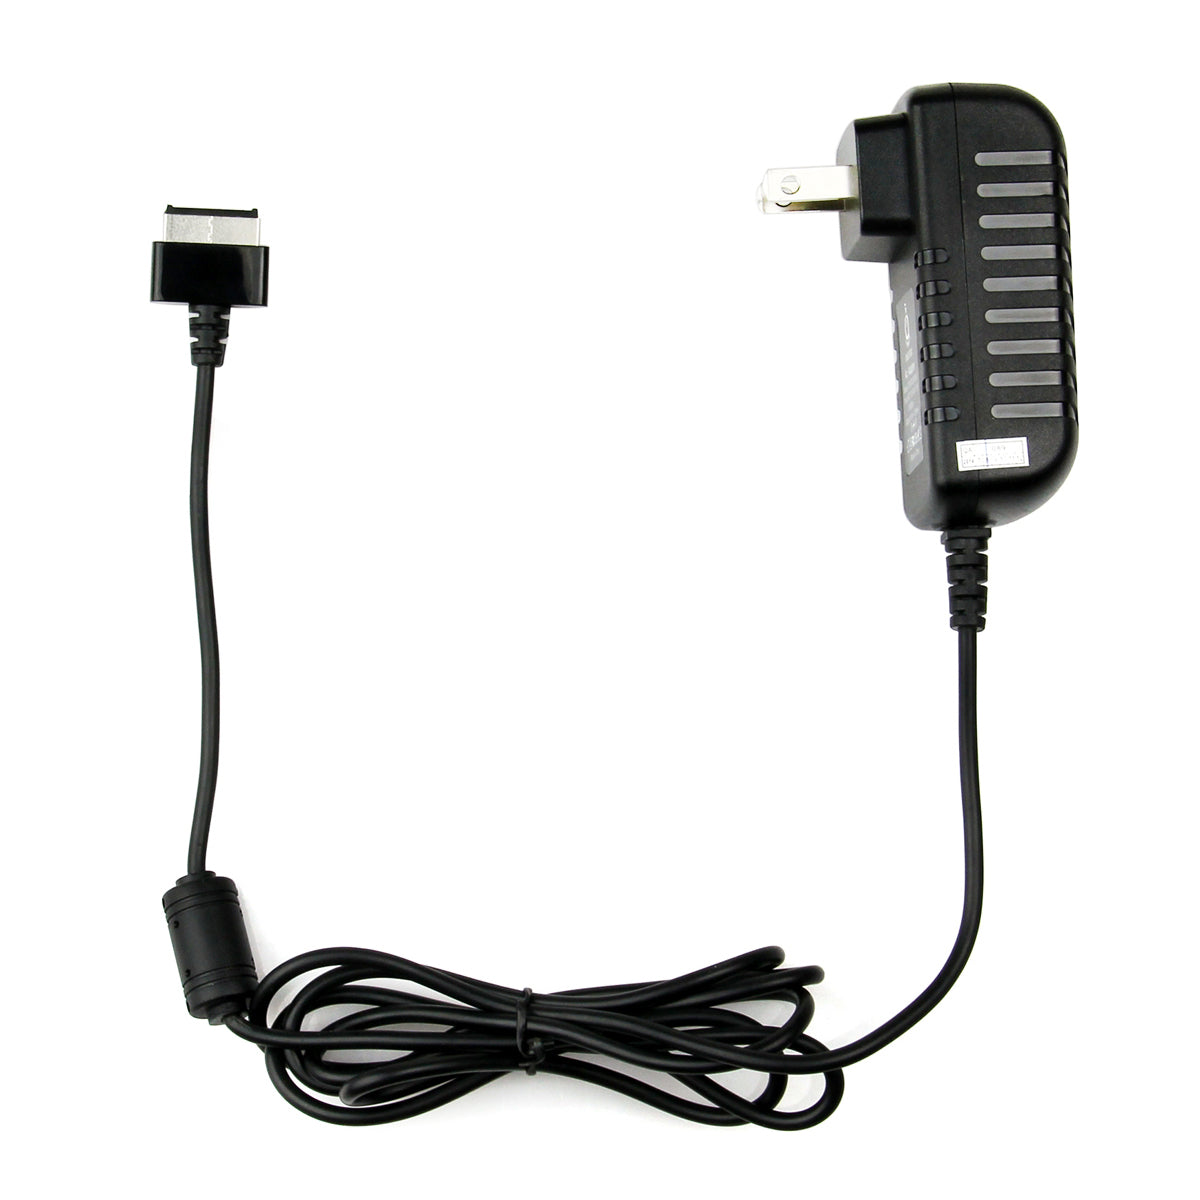 AC Adapter Charger for ASUS TF300T-A1-BK Eee Pad.